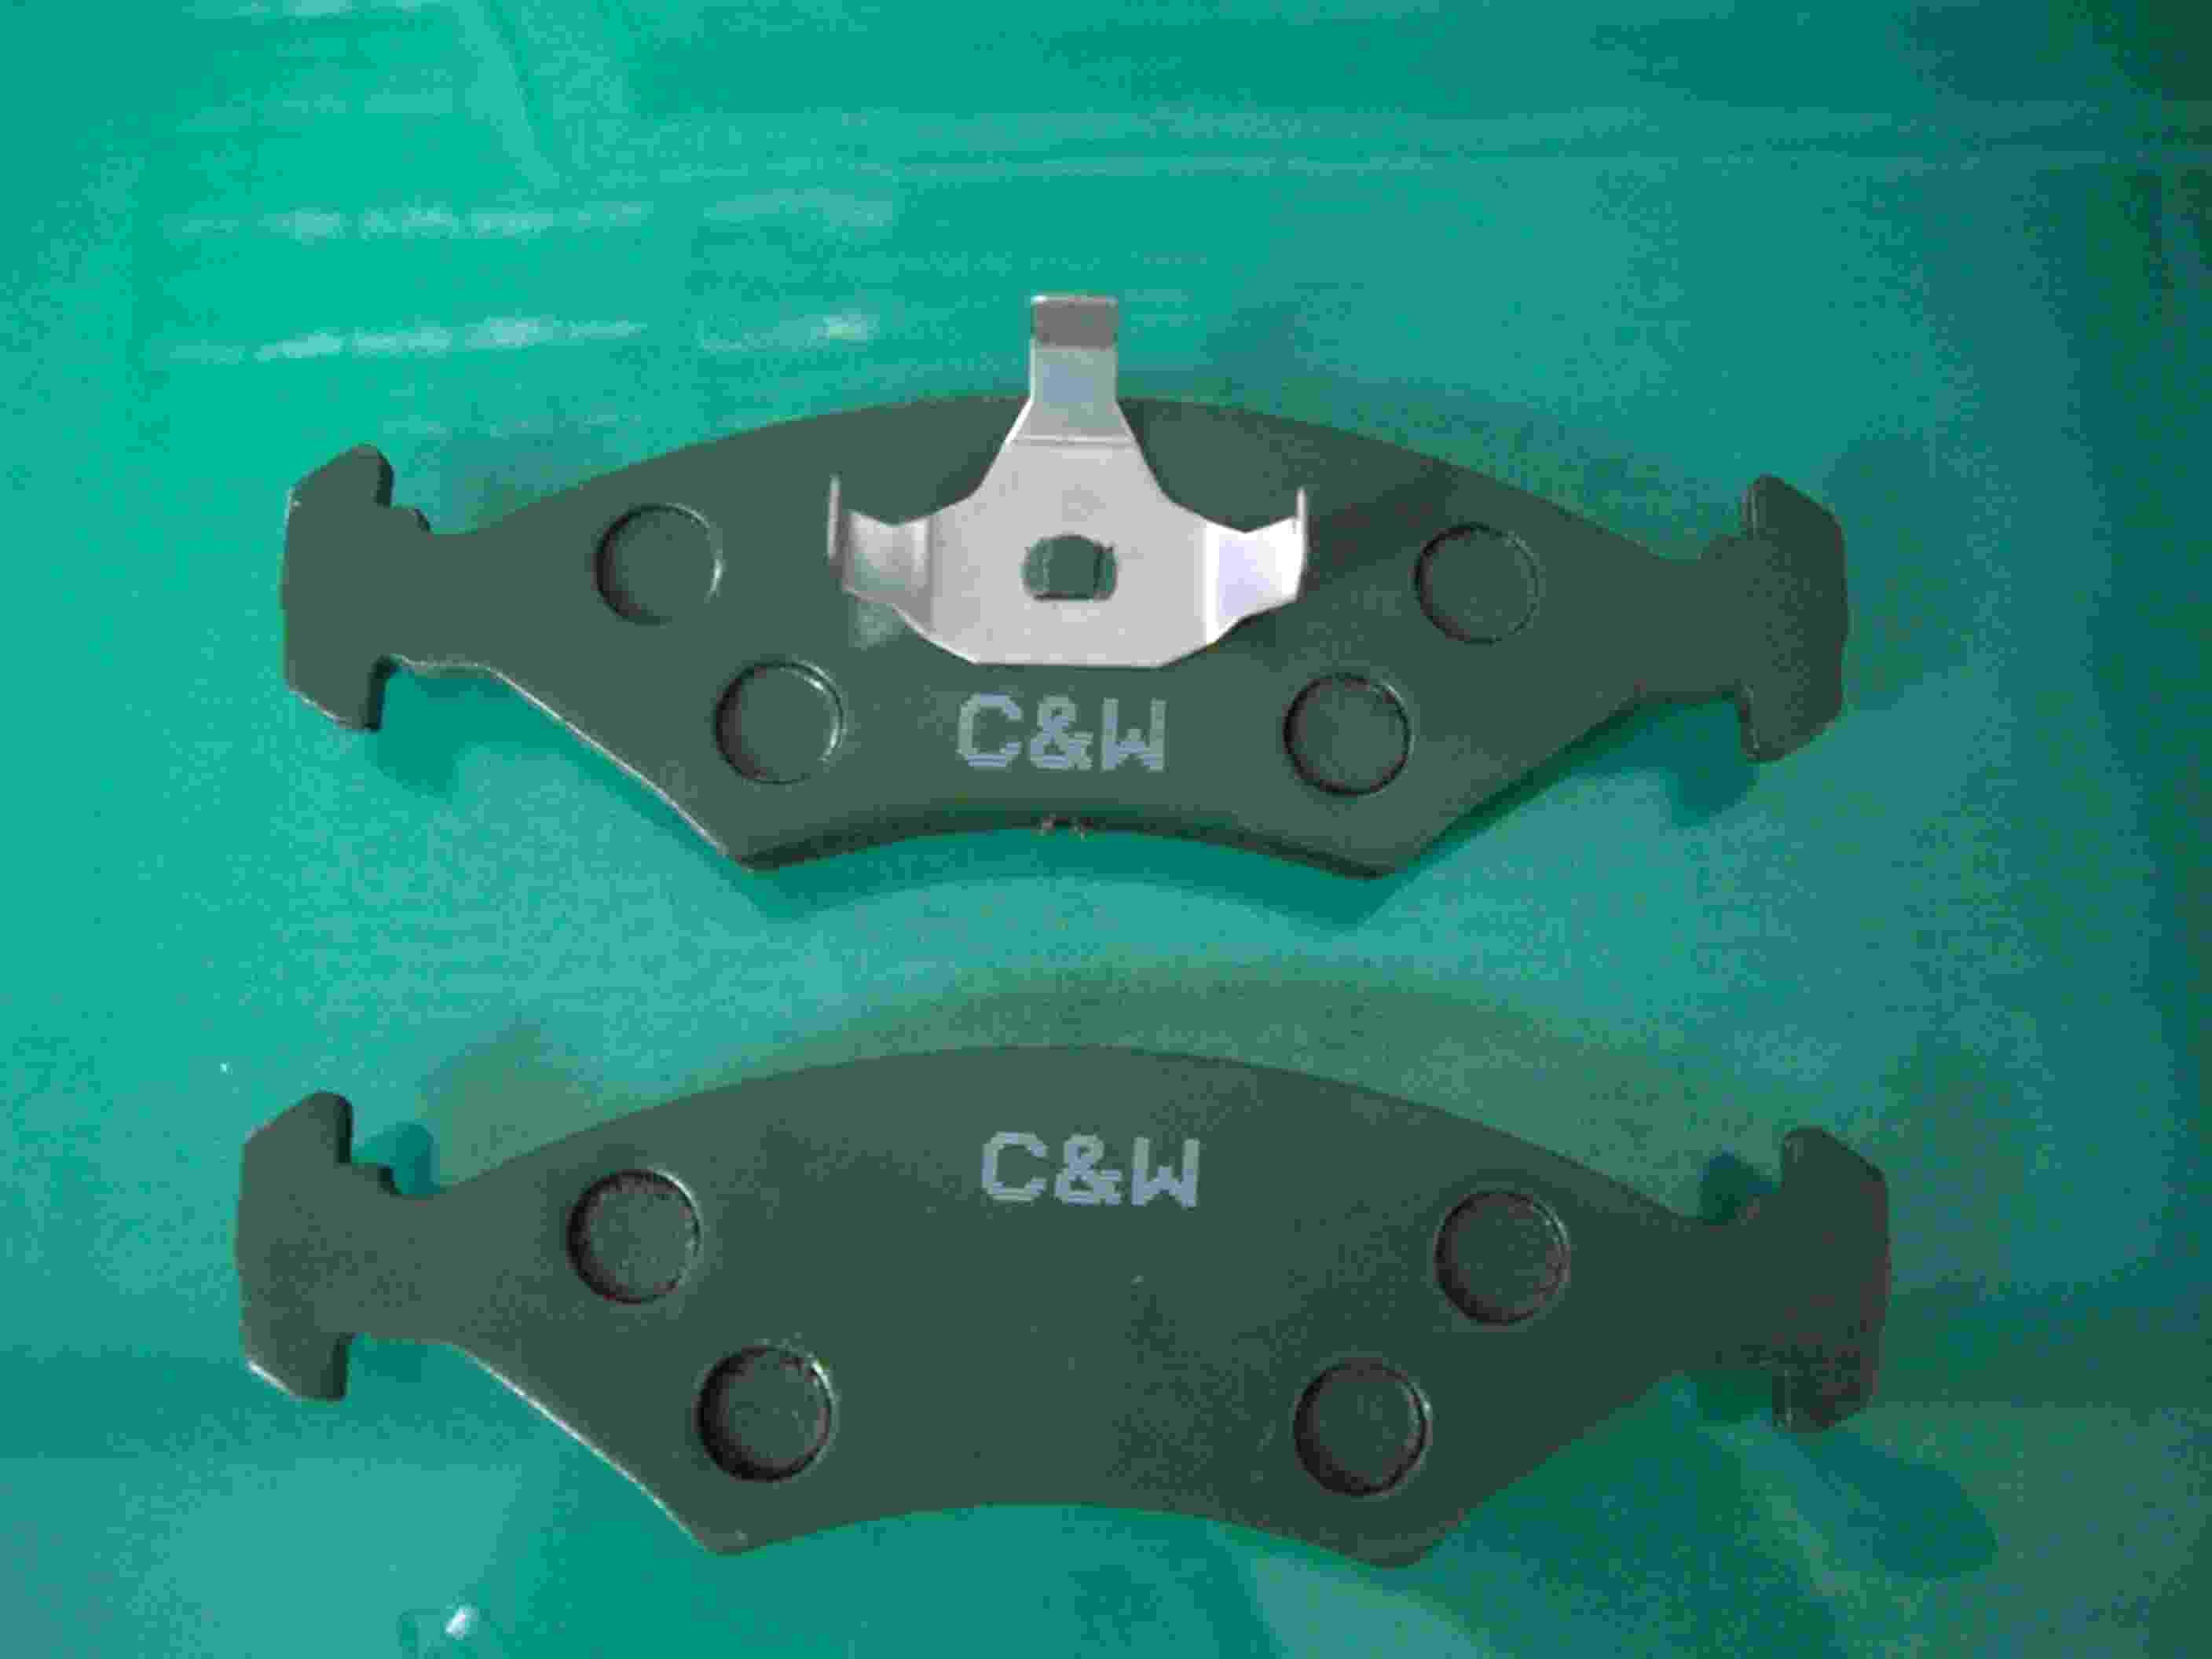 Brake Pads For Ford Sierra(Taiwan). See larger image: Brake Pads For Ford